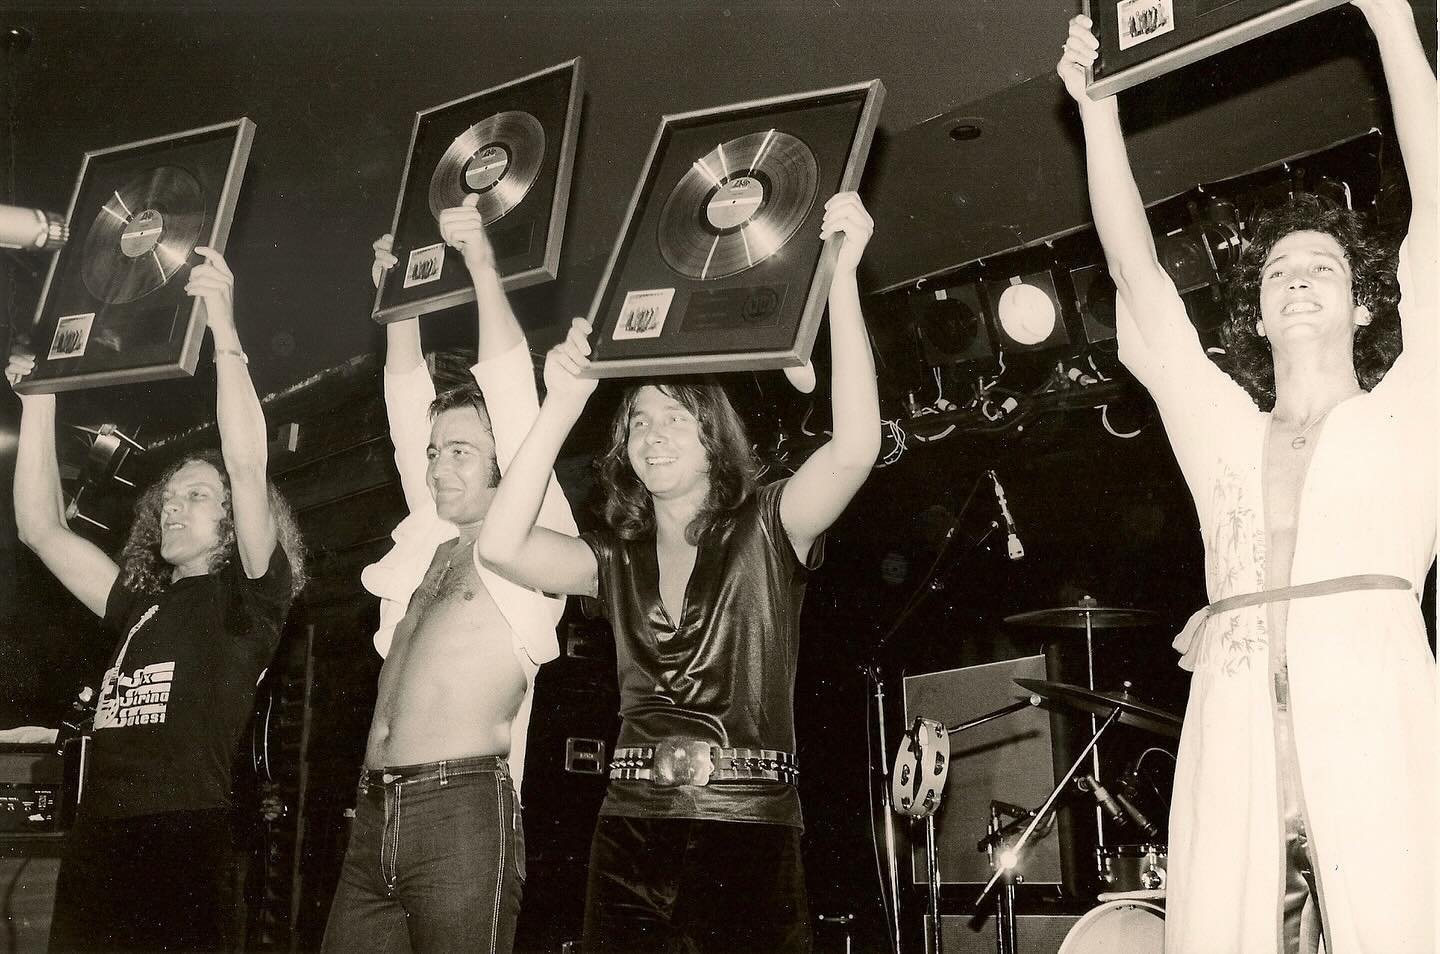 47 years ago today, Foreigner received their debut @riaa_awards Gold record for their self-titled album. This album later became certified Platinum (1 million units sold) on November 6, 2000.